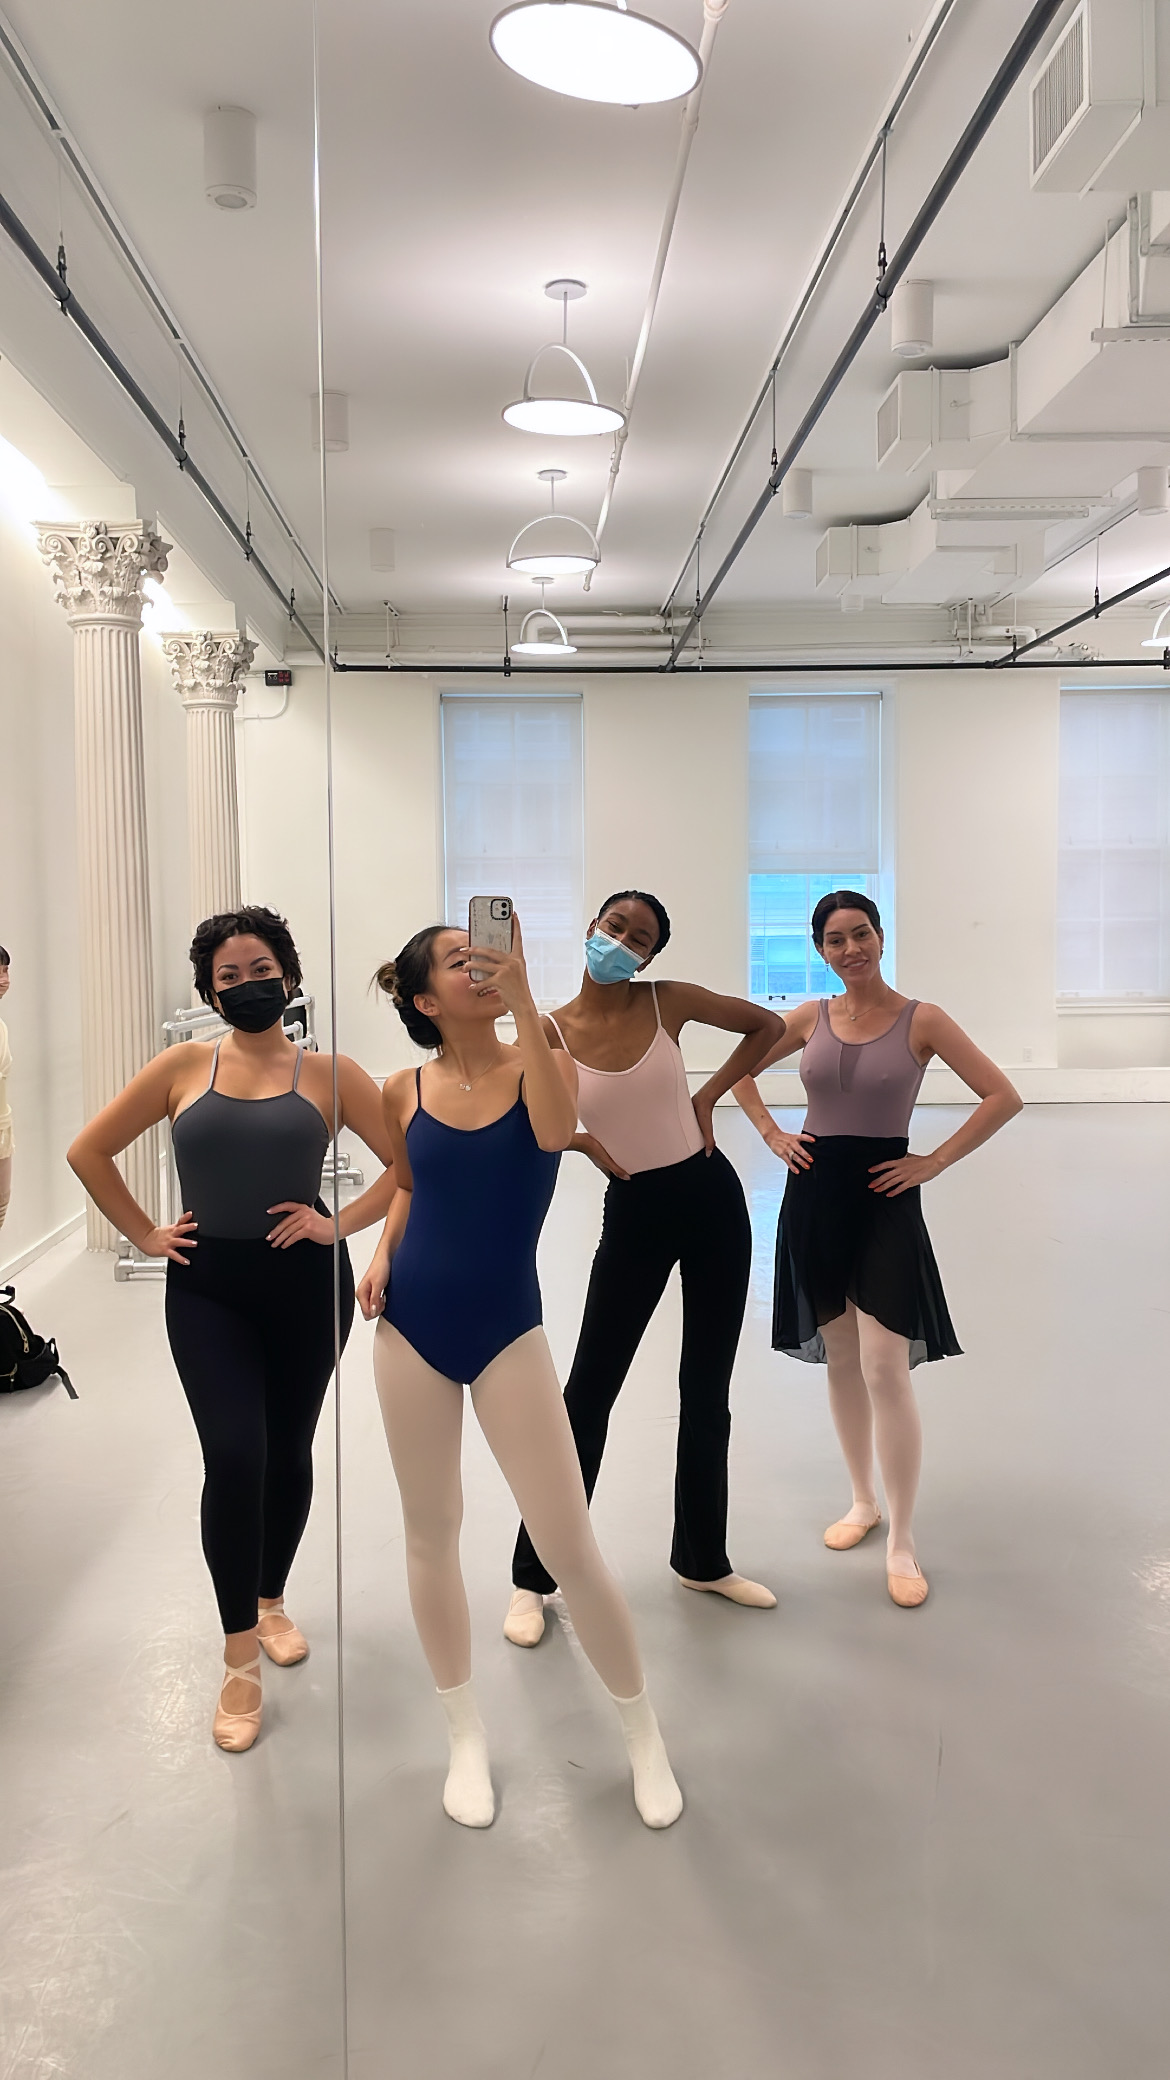 4 students pose for a selfie in a Ballet class